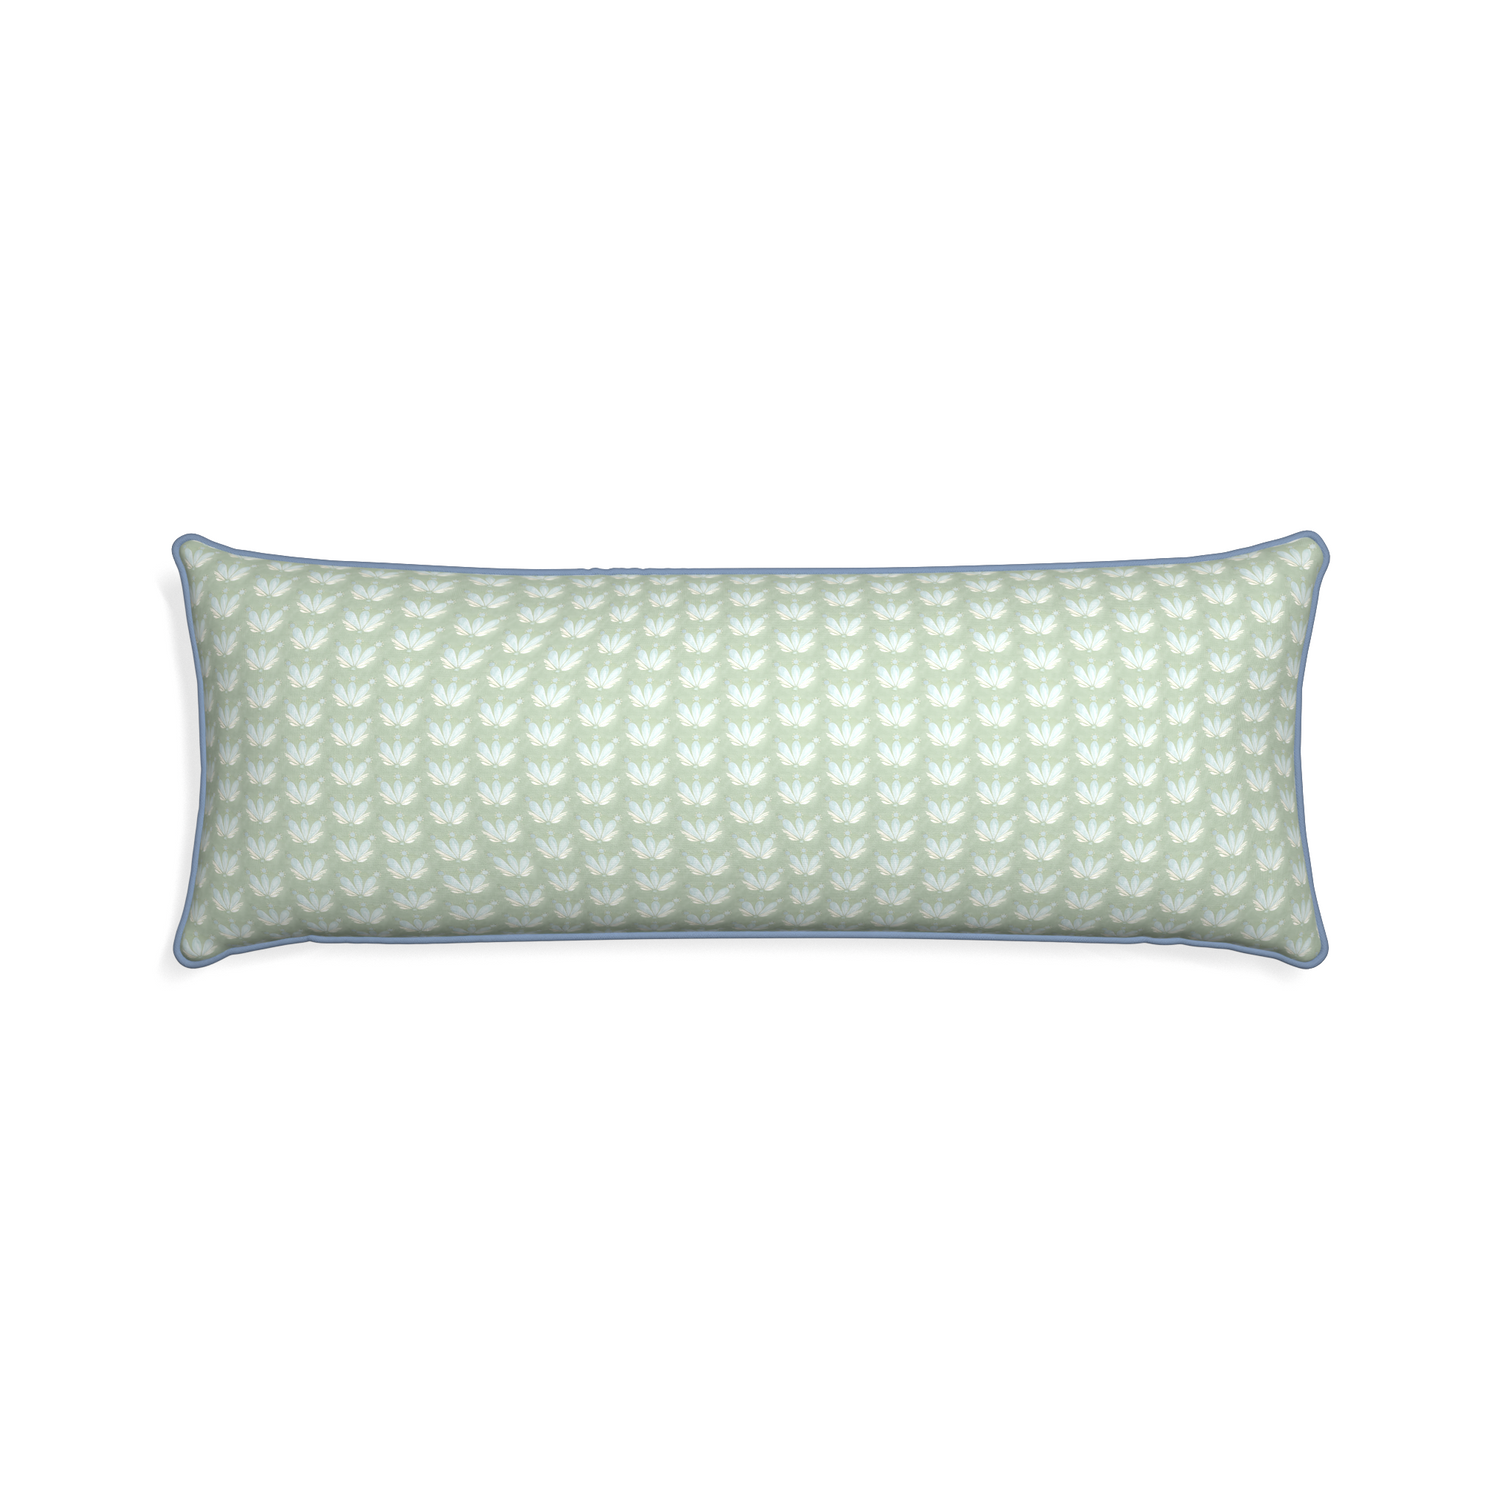 Xl-lumbar serena sea salt custom pillow with sky piping on white background